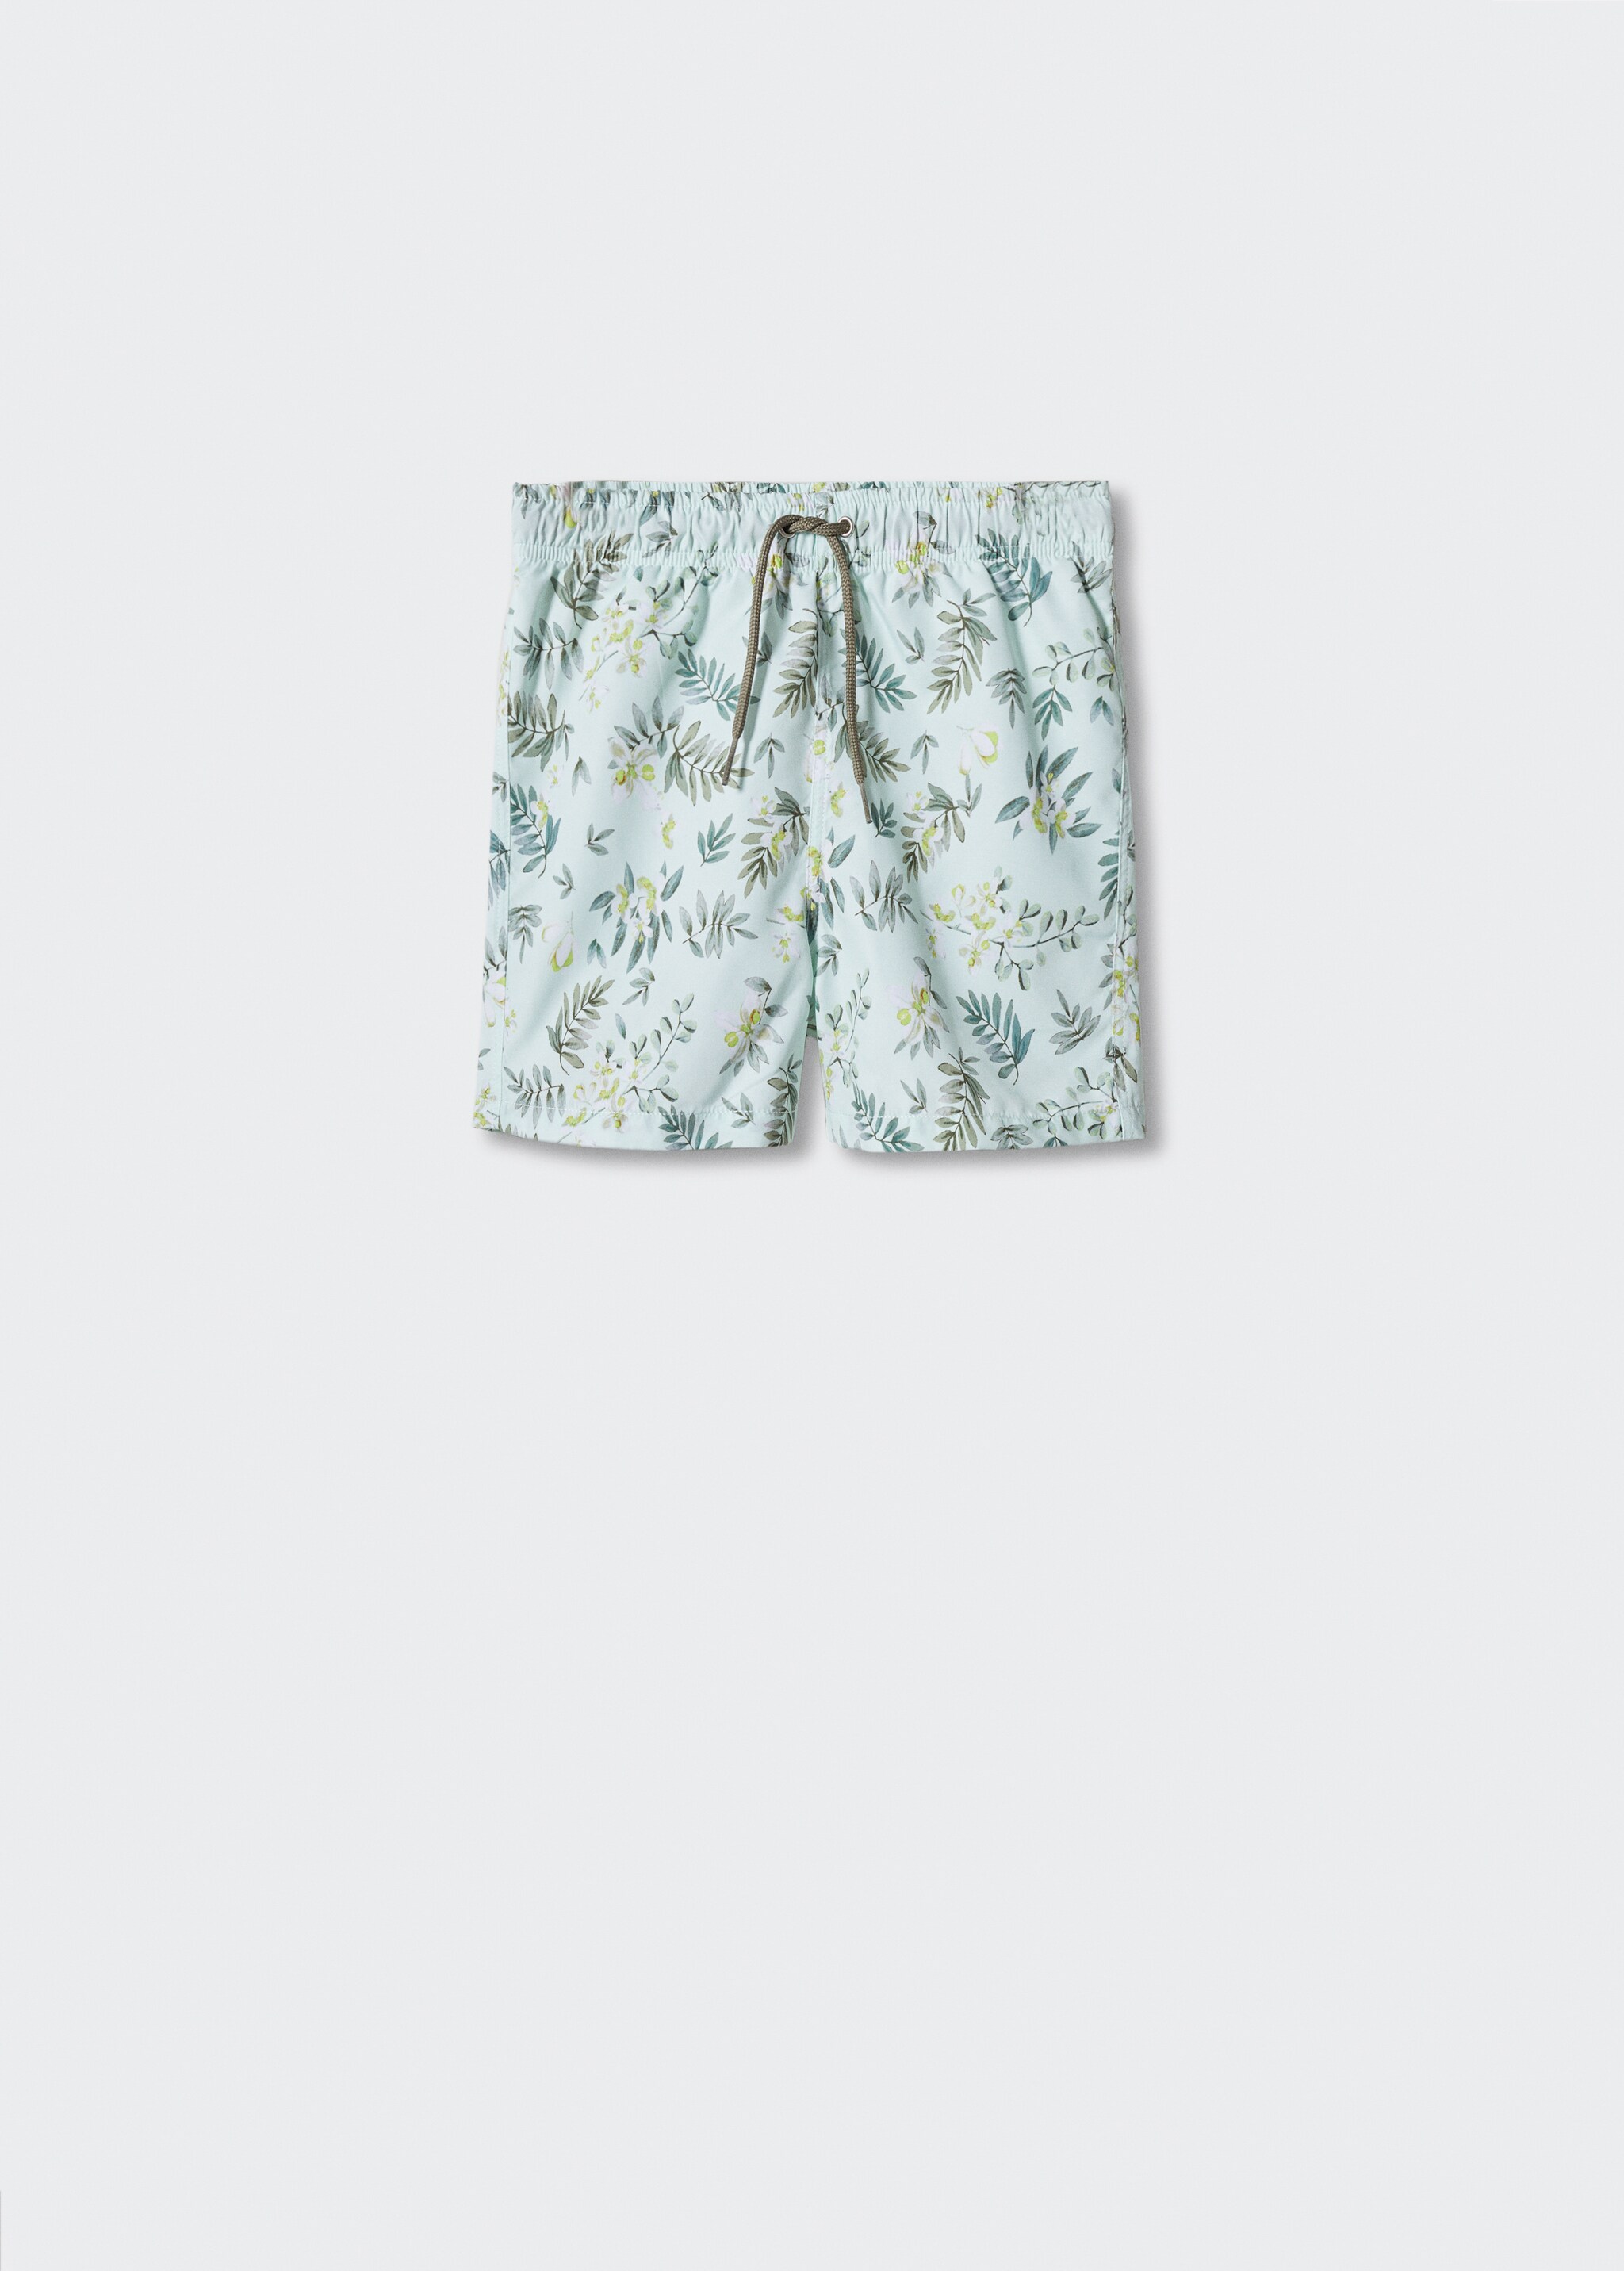 Leaf print swimming trunks - Article without model